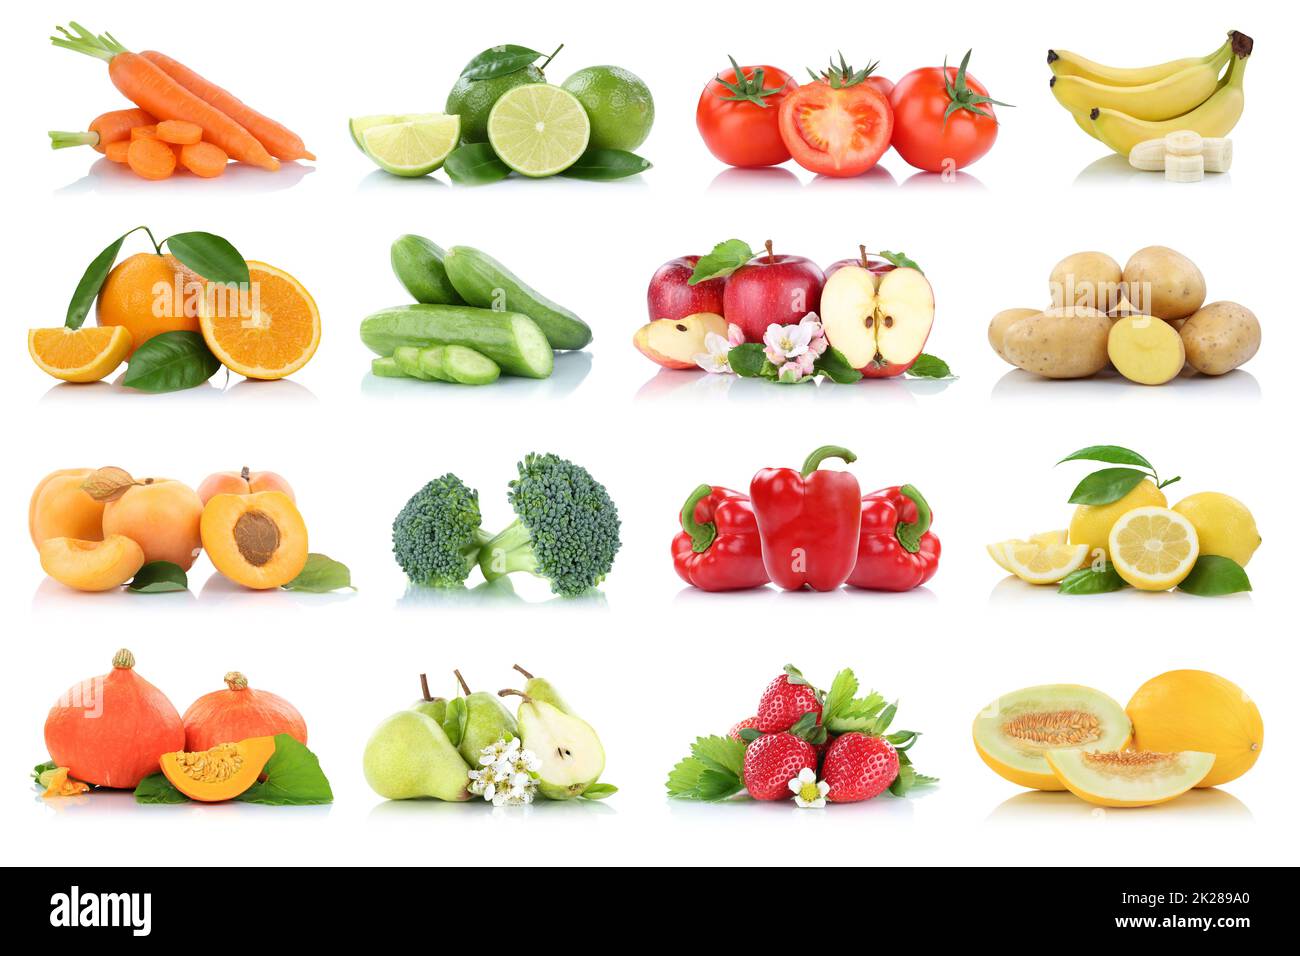 Fruits vegetables collection isolated apple apples oranges strawberries tomatoes banana colors fresh fruit Stock Photo